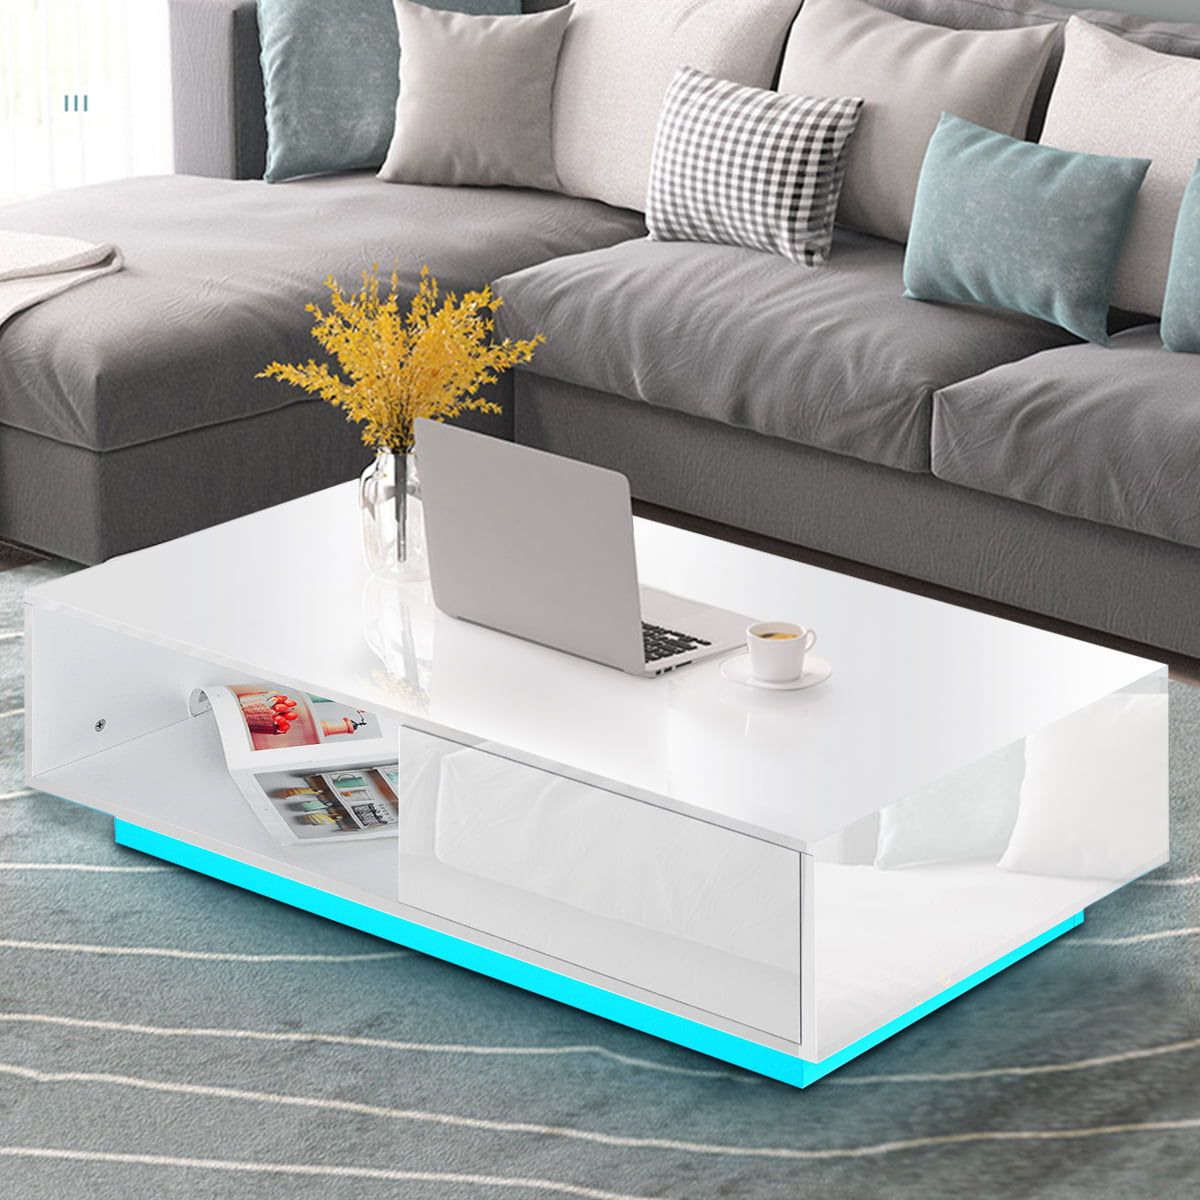 Preferred High Gloss Rgb Led Coffee Table With 2 Drawer Storage Modern Sofa Side Throughout Coffee Tables With Drawers And Led Lights (View 2 of 15)